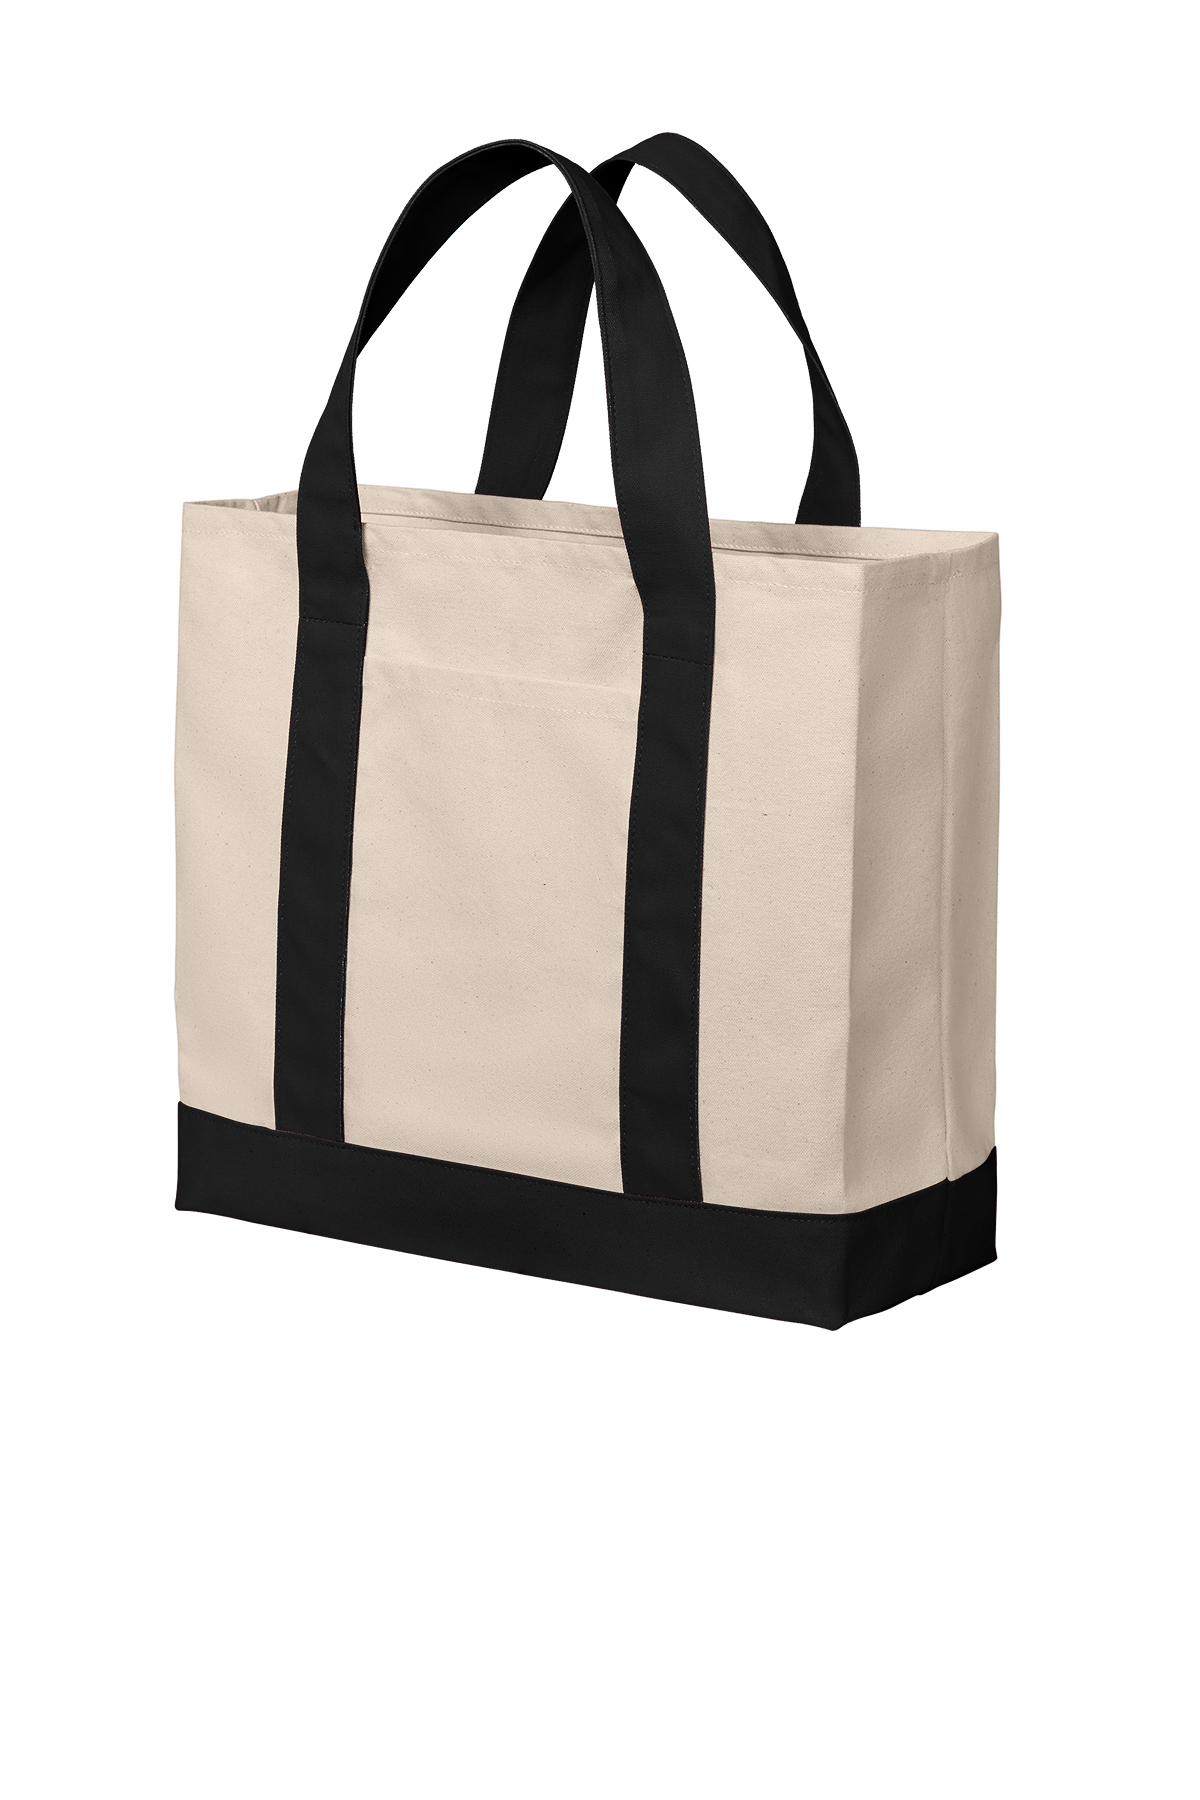 Port Authority Cotton Canvas Two-Tone Tote | Product | SanMar